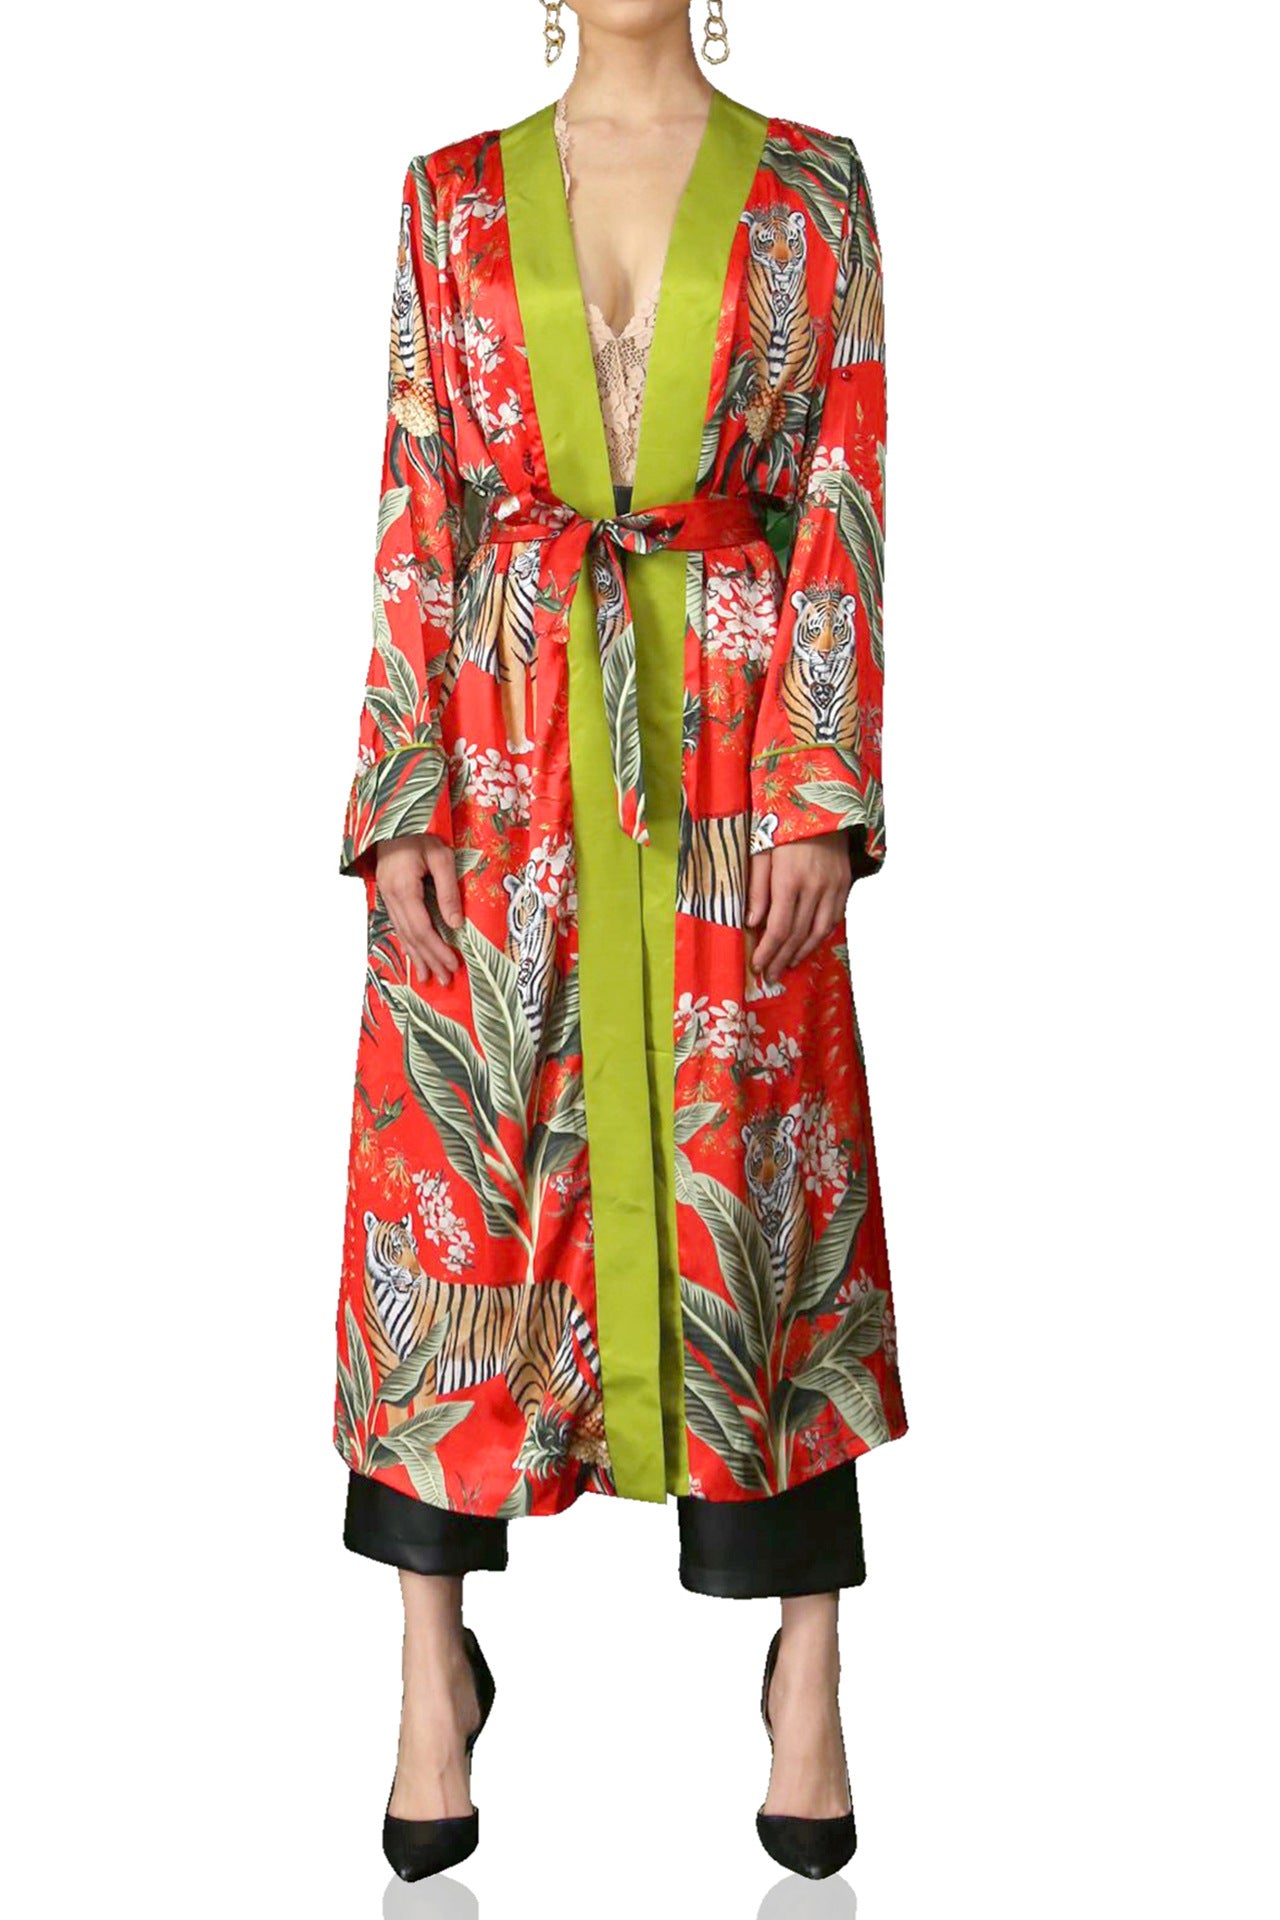 Printed-Robes-For-Women